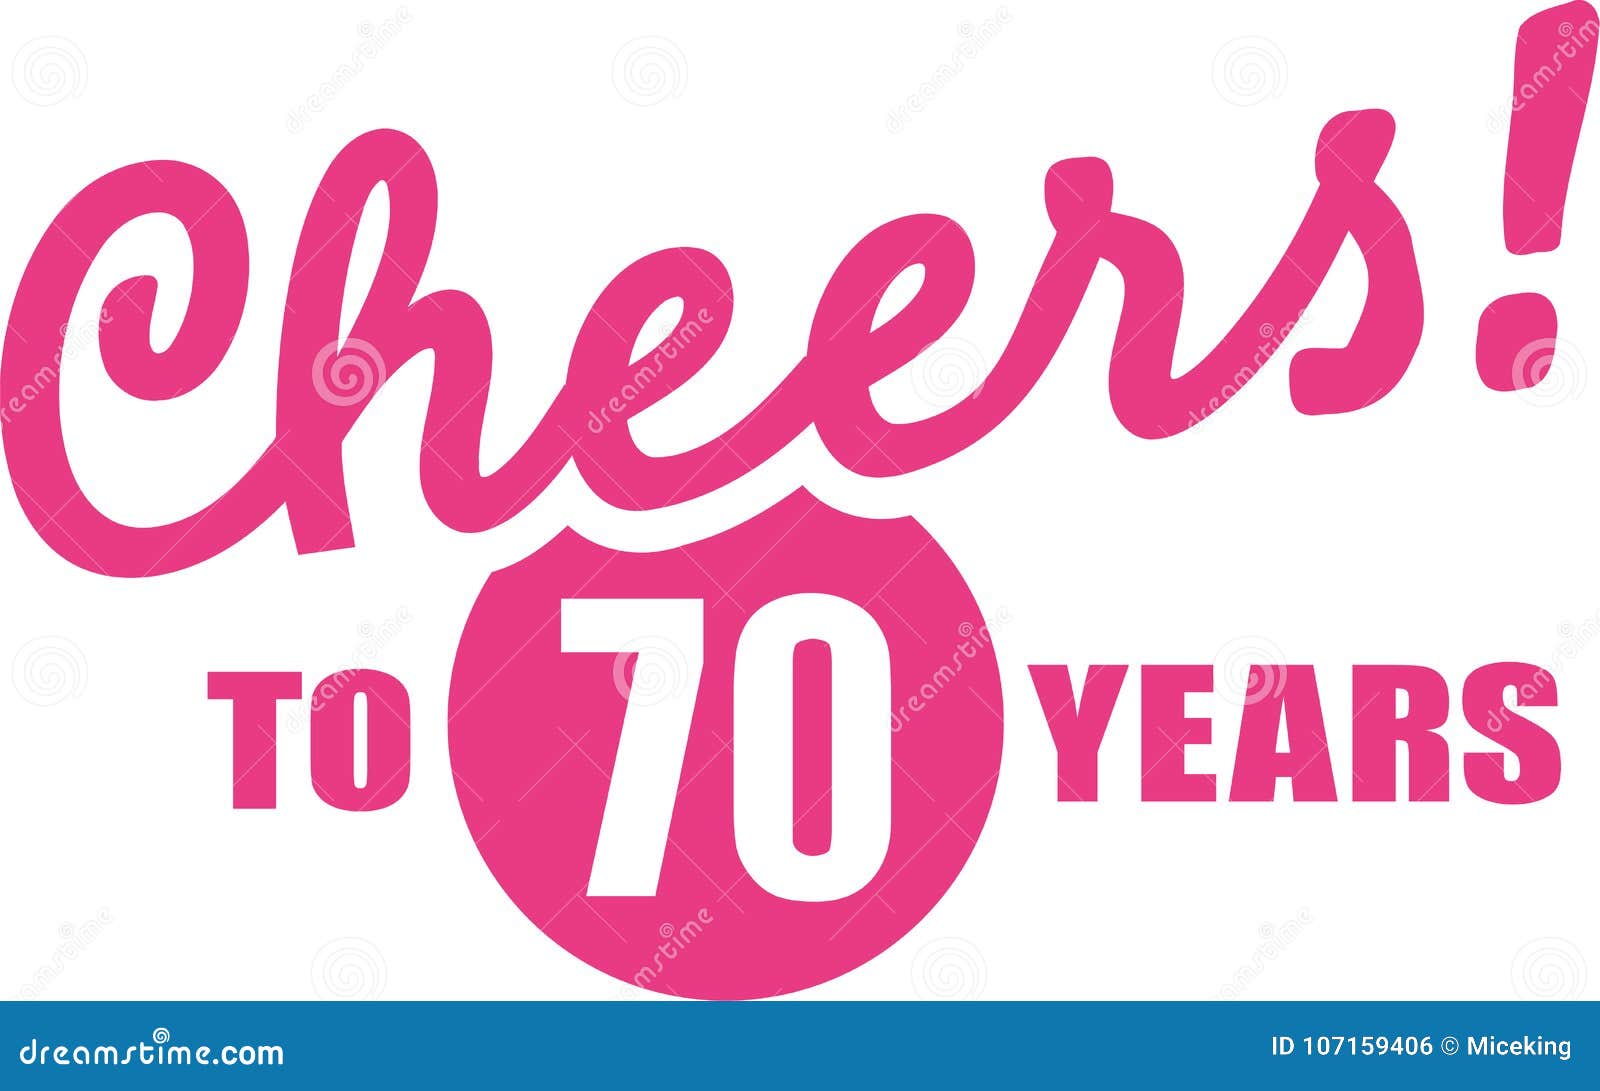 Onwijs Cheers To 70 Years - 70th Birthday Stock Vector - Illustration of SL-86